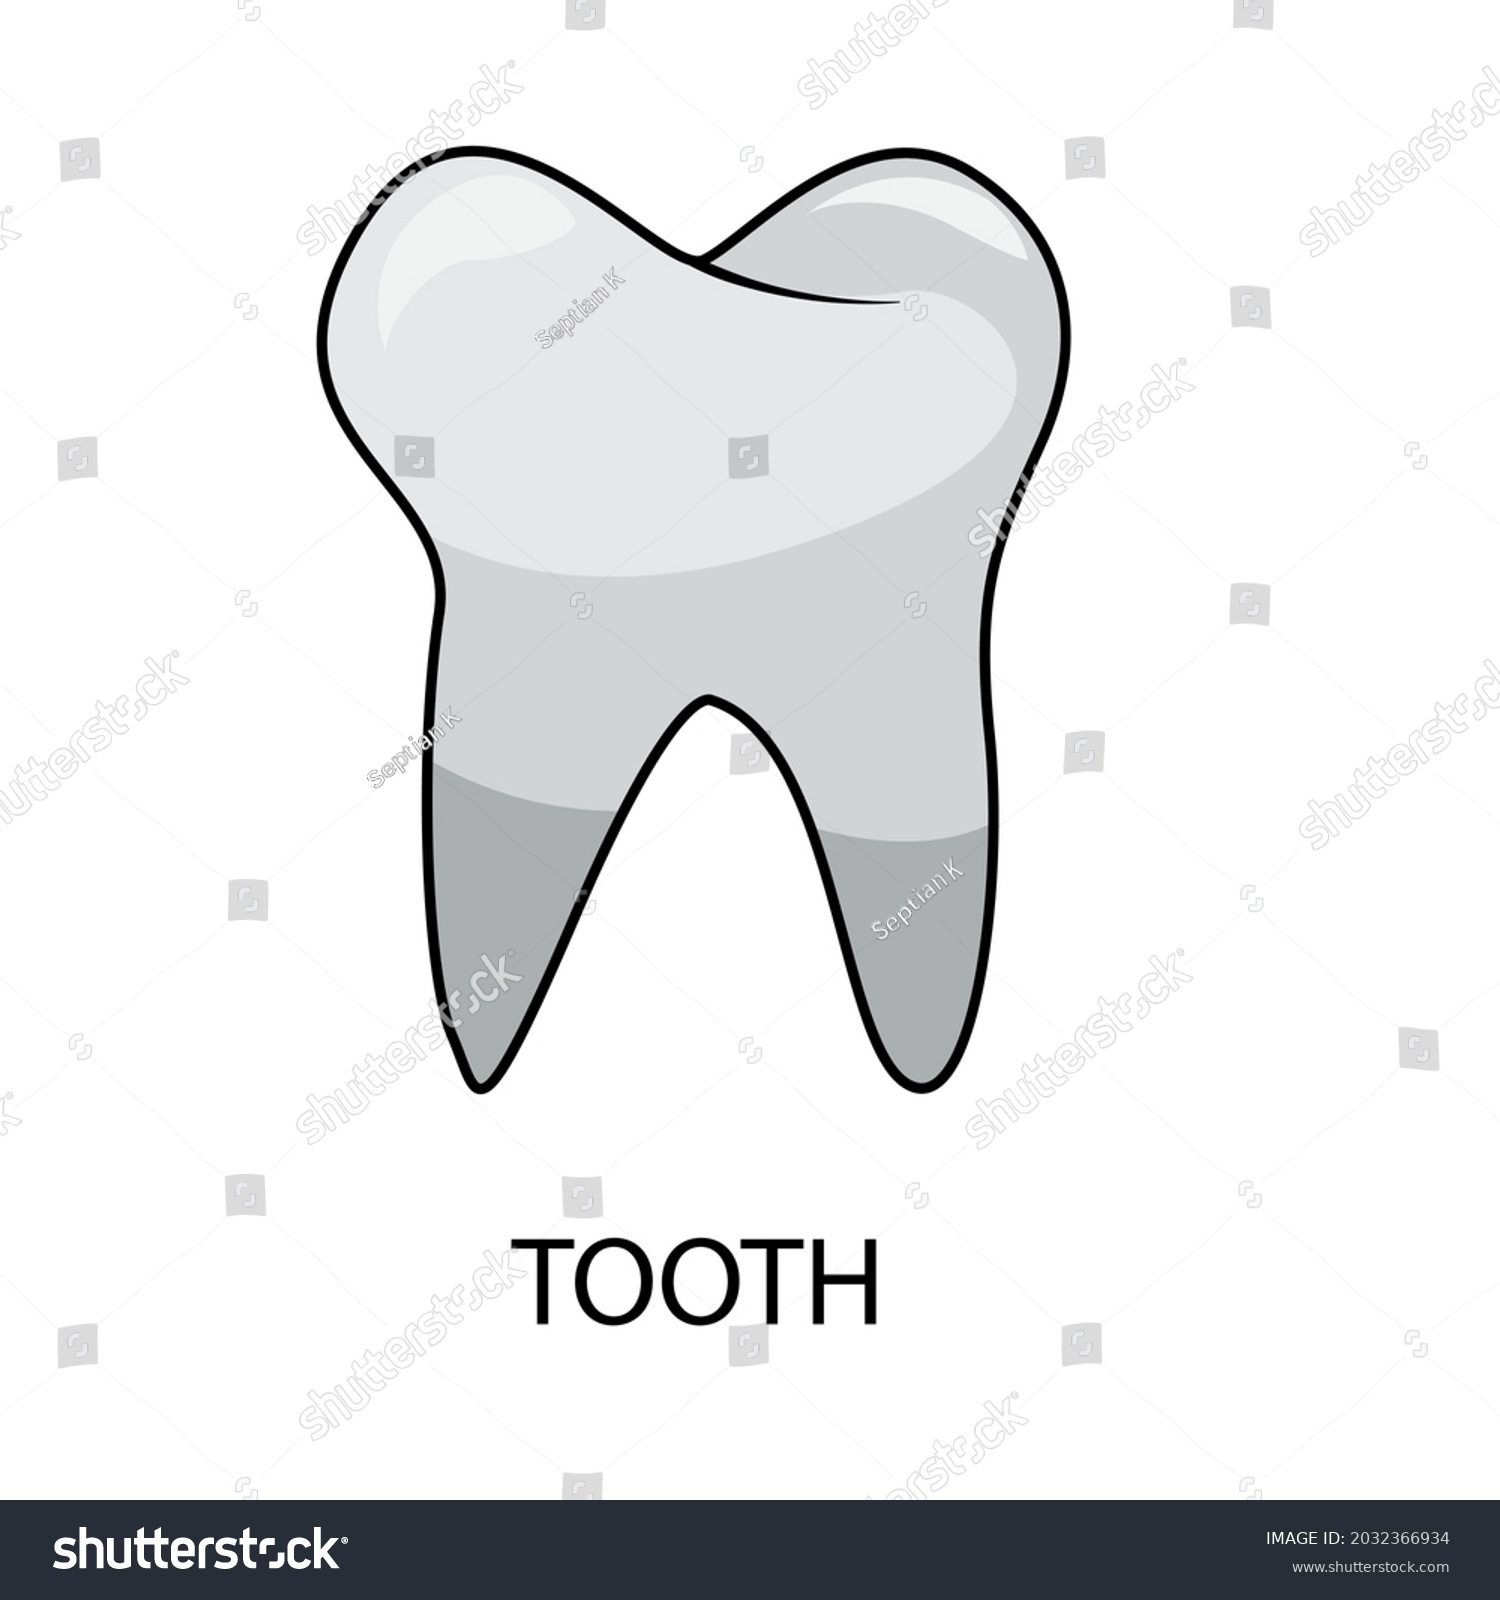 SVG of Teeth are one of the most powerful parts of the human body. Teeth are made of protein and minerals, as well as calcium. In general, teeth play an important role in chewing food, as well as helping you svg